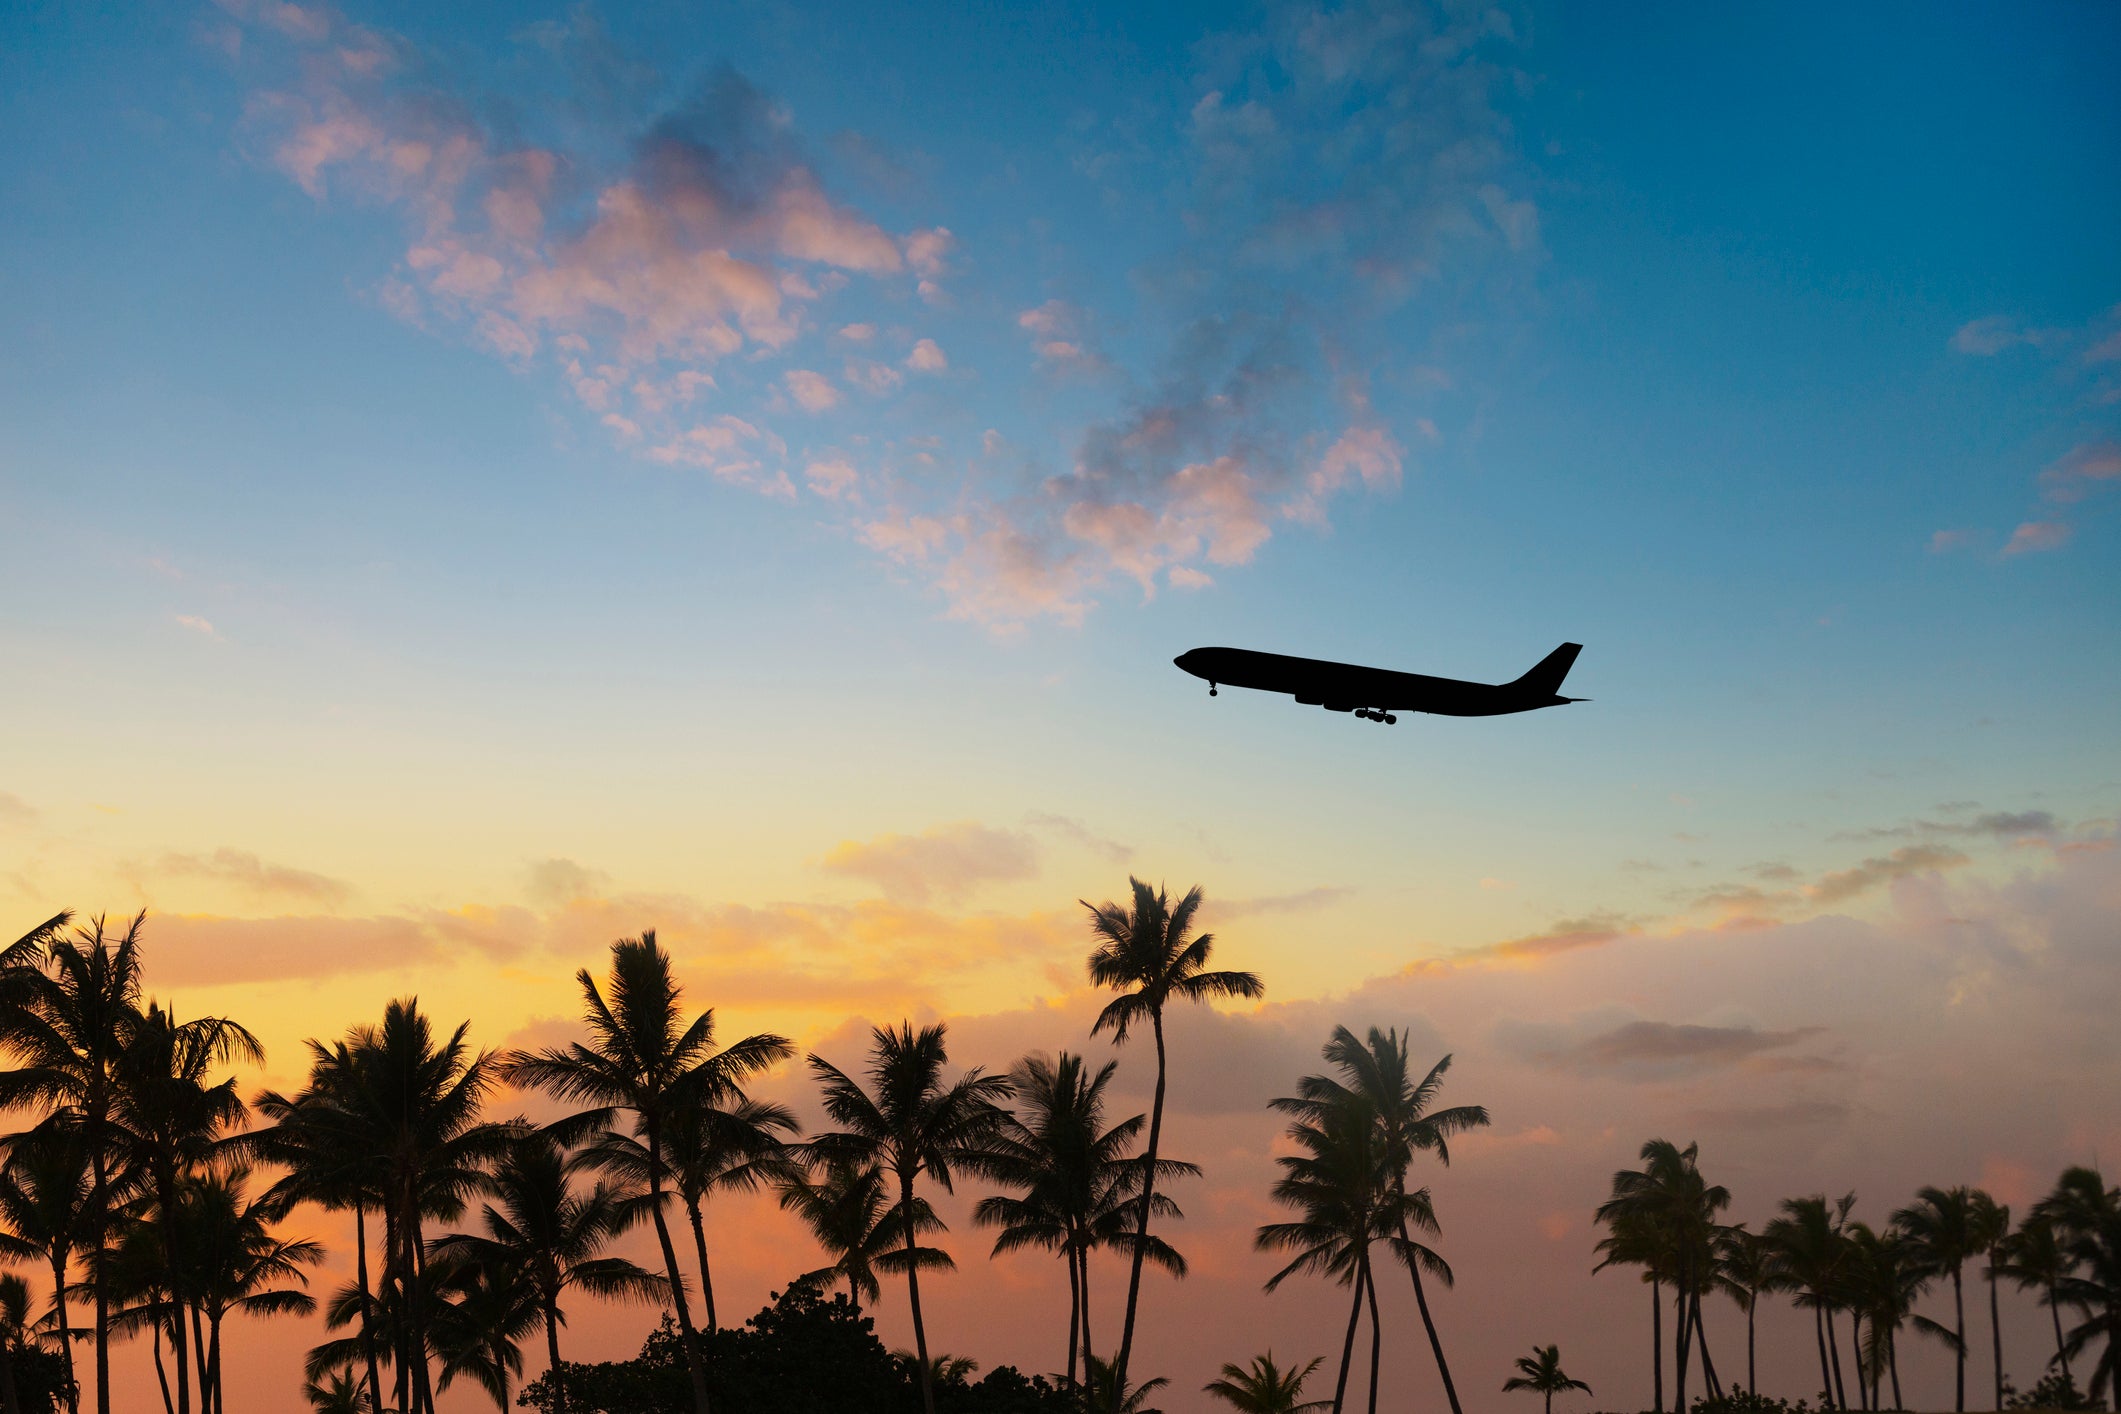 Silhouette of airplane flying over palm trees in sunset